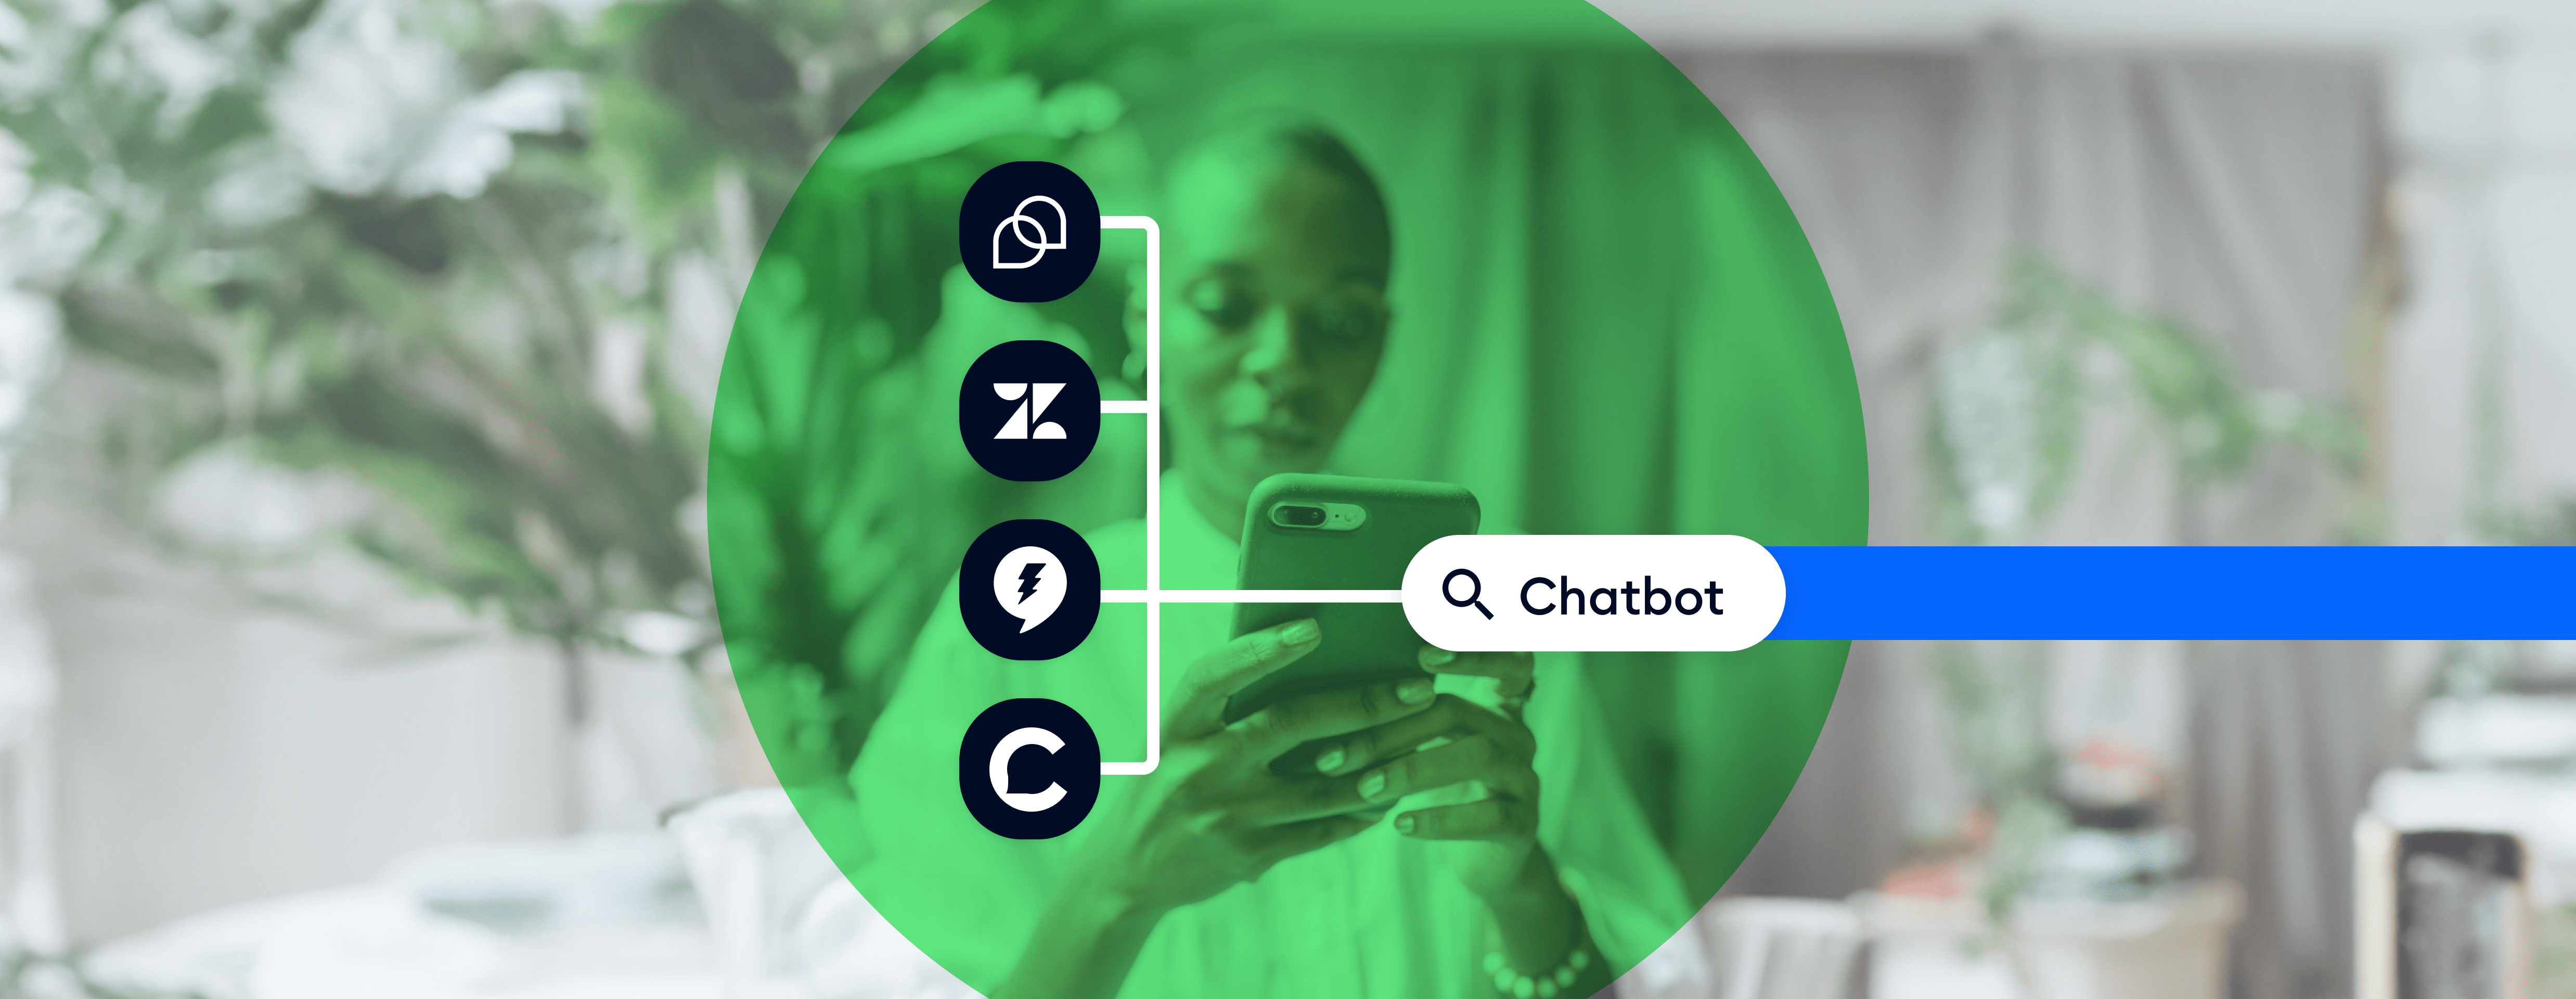 Chatbot apps cover image